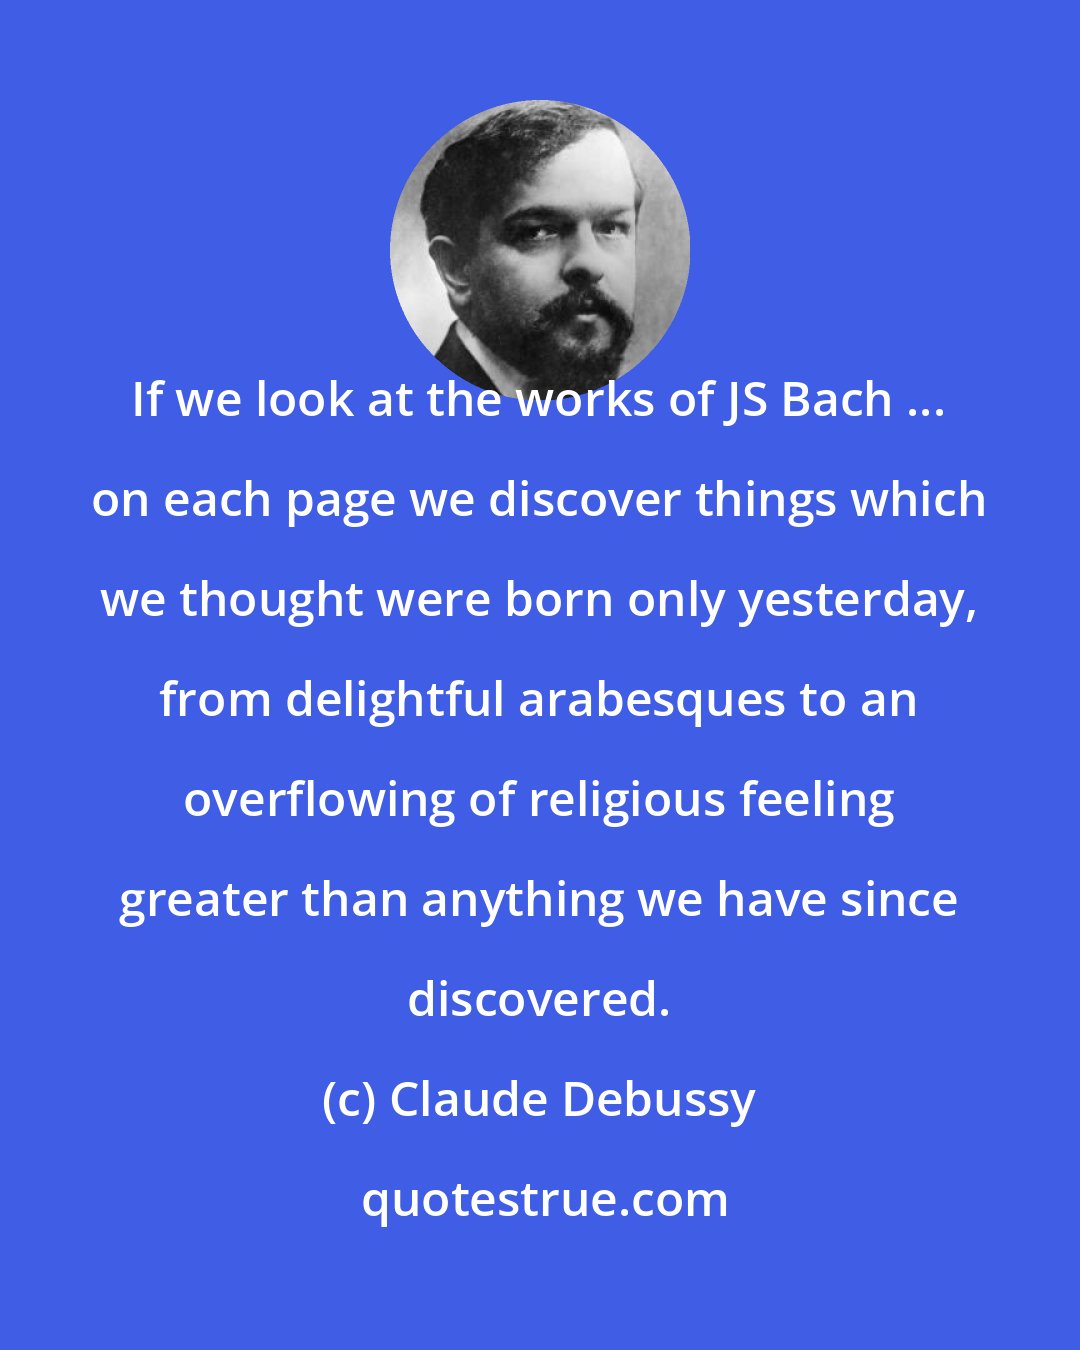 Claude Debussy: If we look at the works of JS Bach ... on each page we discover things which we thought were born only yesterday, from delightful arabesques to an overflowing of religious feeling greater than anything we have since discovered.